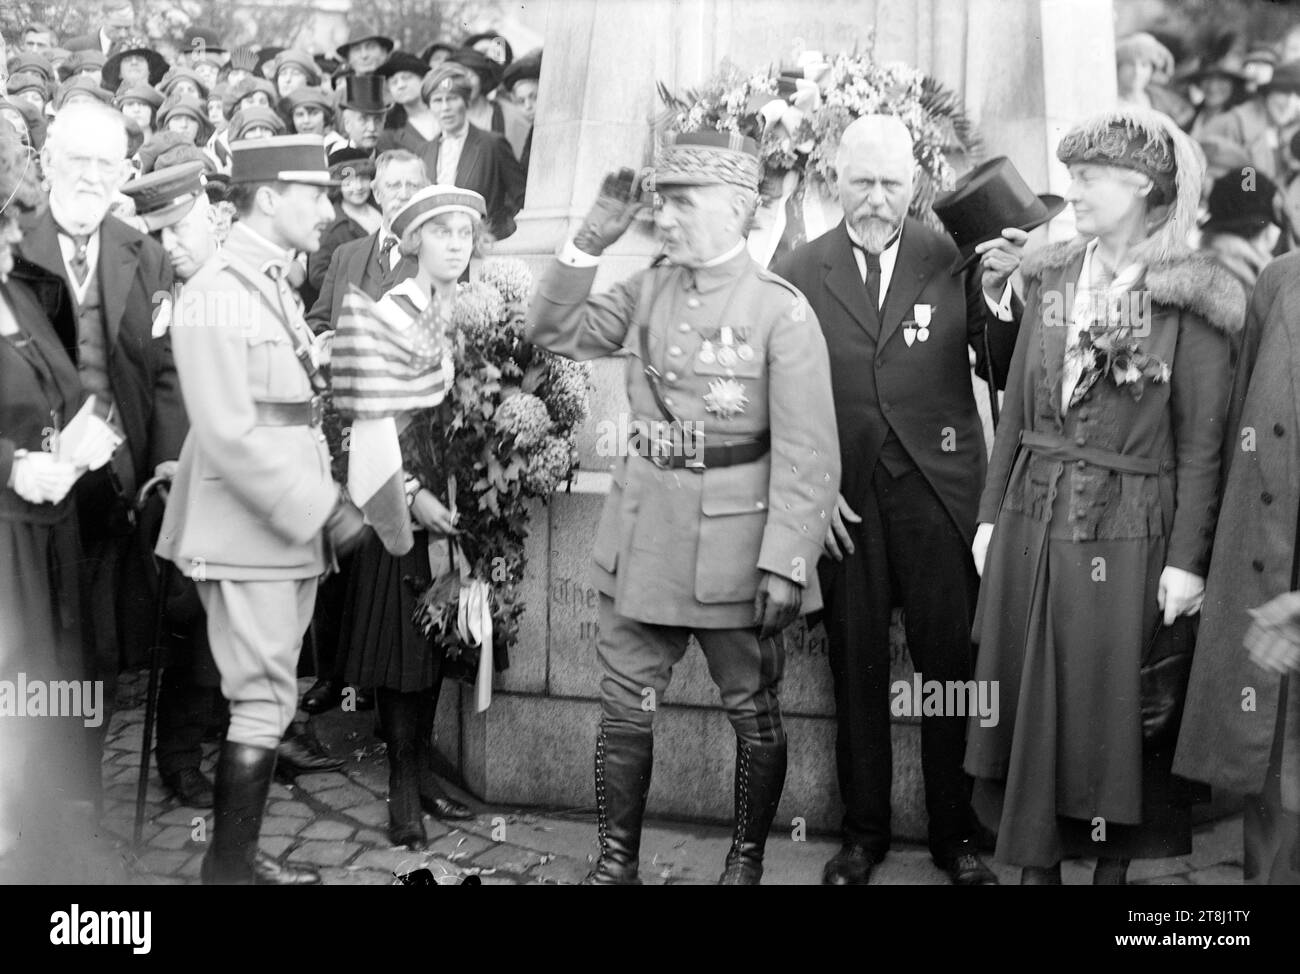 Marshal Ferdinand Jean Marie Foch (1851-1929), a French general who served as the Allied Supreme Allied Commander during the last year of World War I with mineralogist George Frederick Kunz (1856-1932) at a ceremony held at the Joan of Arc statue in New York City. Also in the photo, standing at the right, is Anna Vaughn Hyatt Huntington, sculptor of the Joan of Arc statue, and Jacqueline Vernot holding flowers. Stock Photo